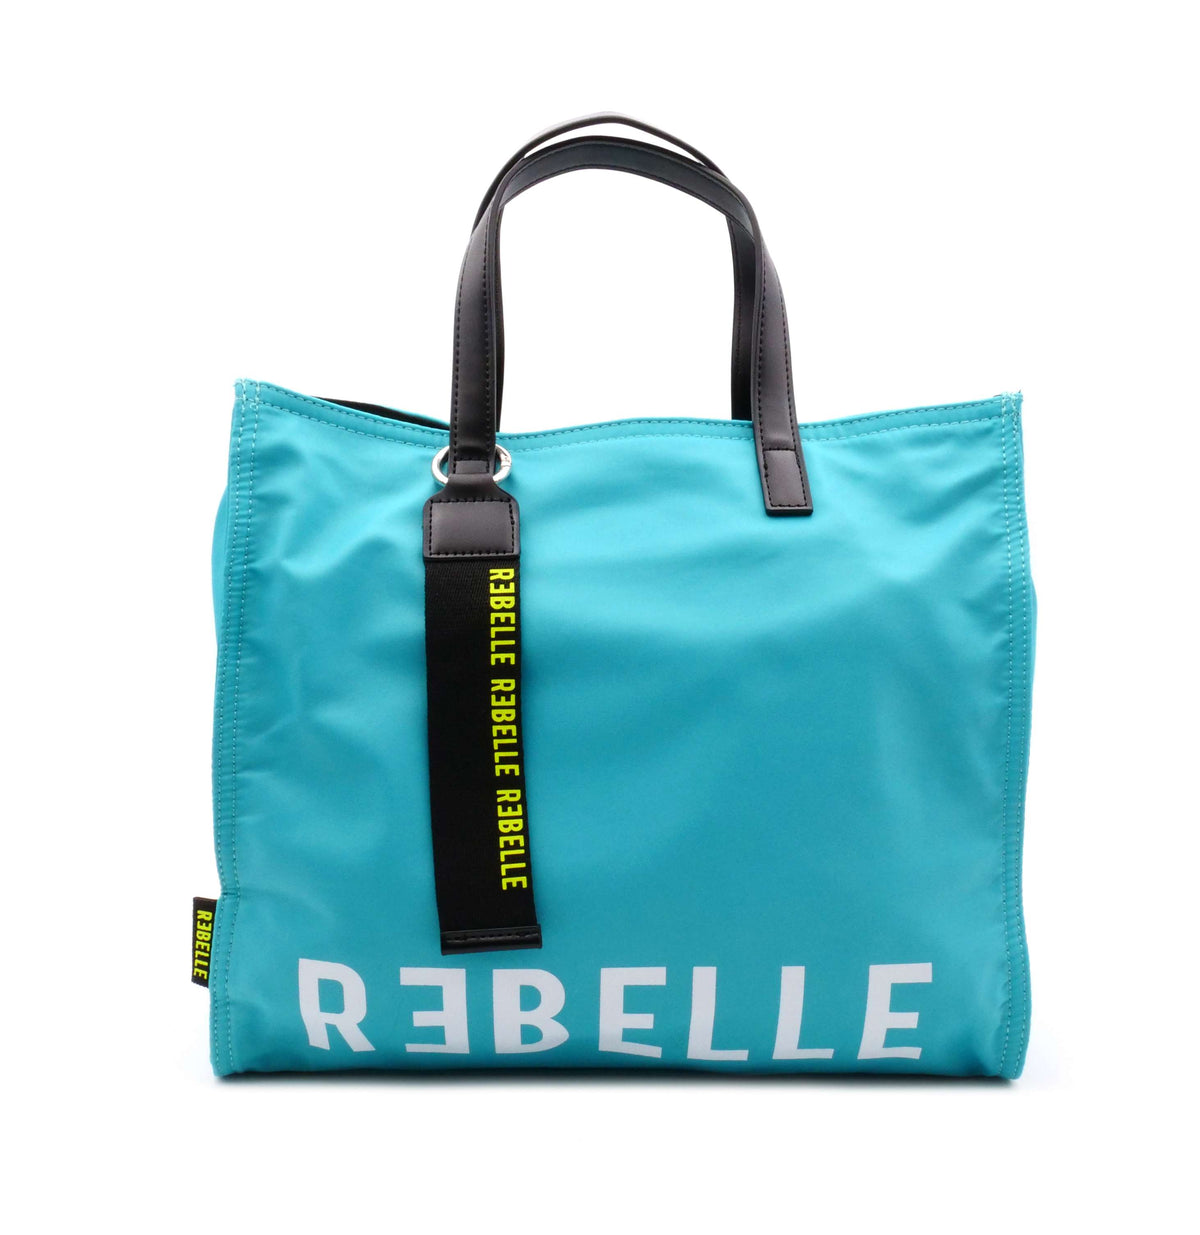 Shopping Bag ELECTRA REBELLE - TURQUOISE